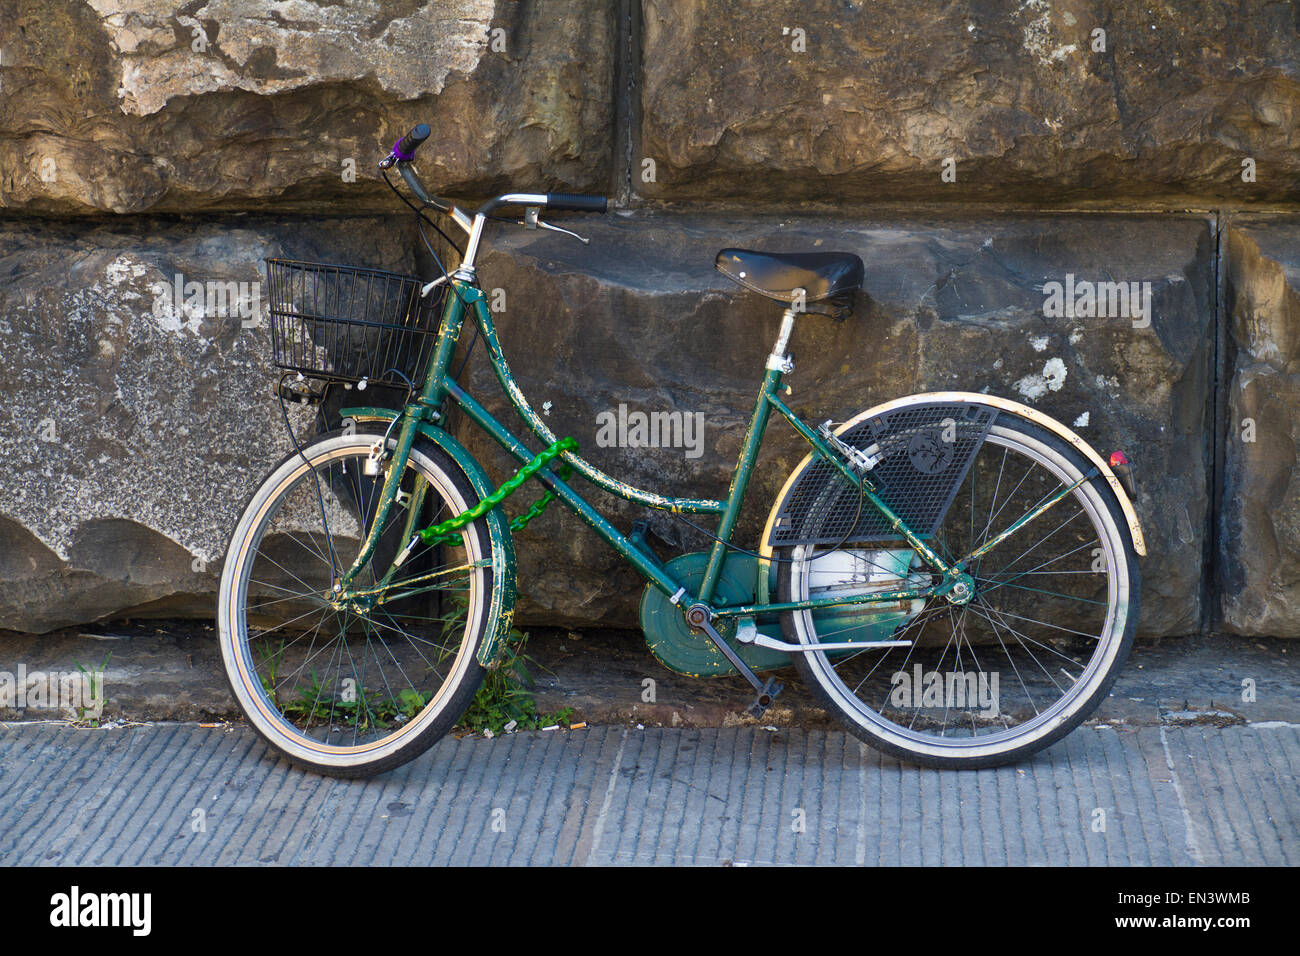 Italy, Florence, Old green bike against stone wall Stock Photo